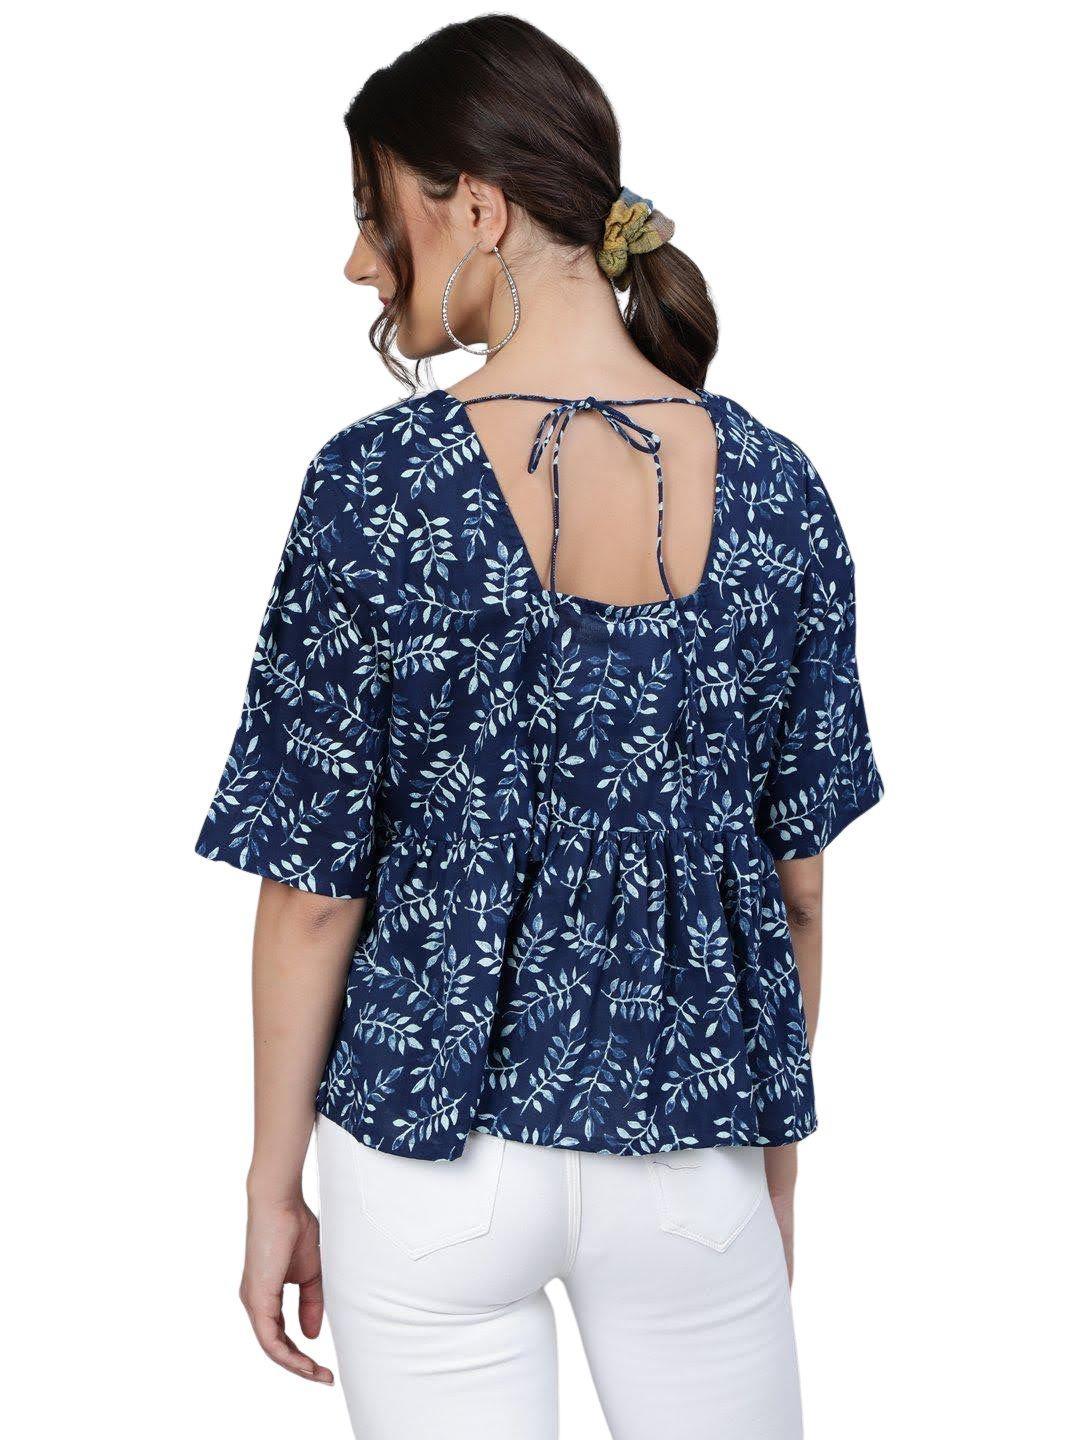 navy-blue-white-floral-printed-pure-cotton-top-10207114BL, Women Clothing, Cotton Top